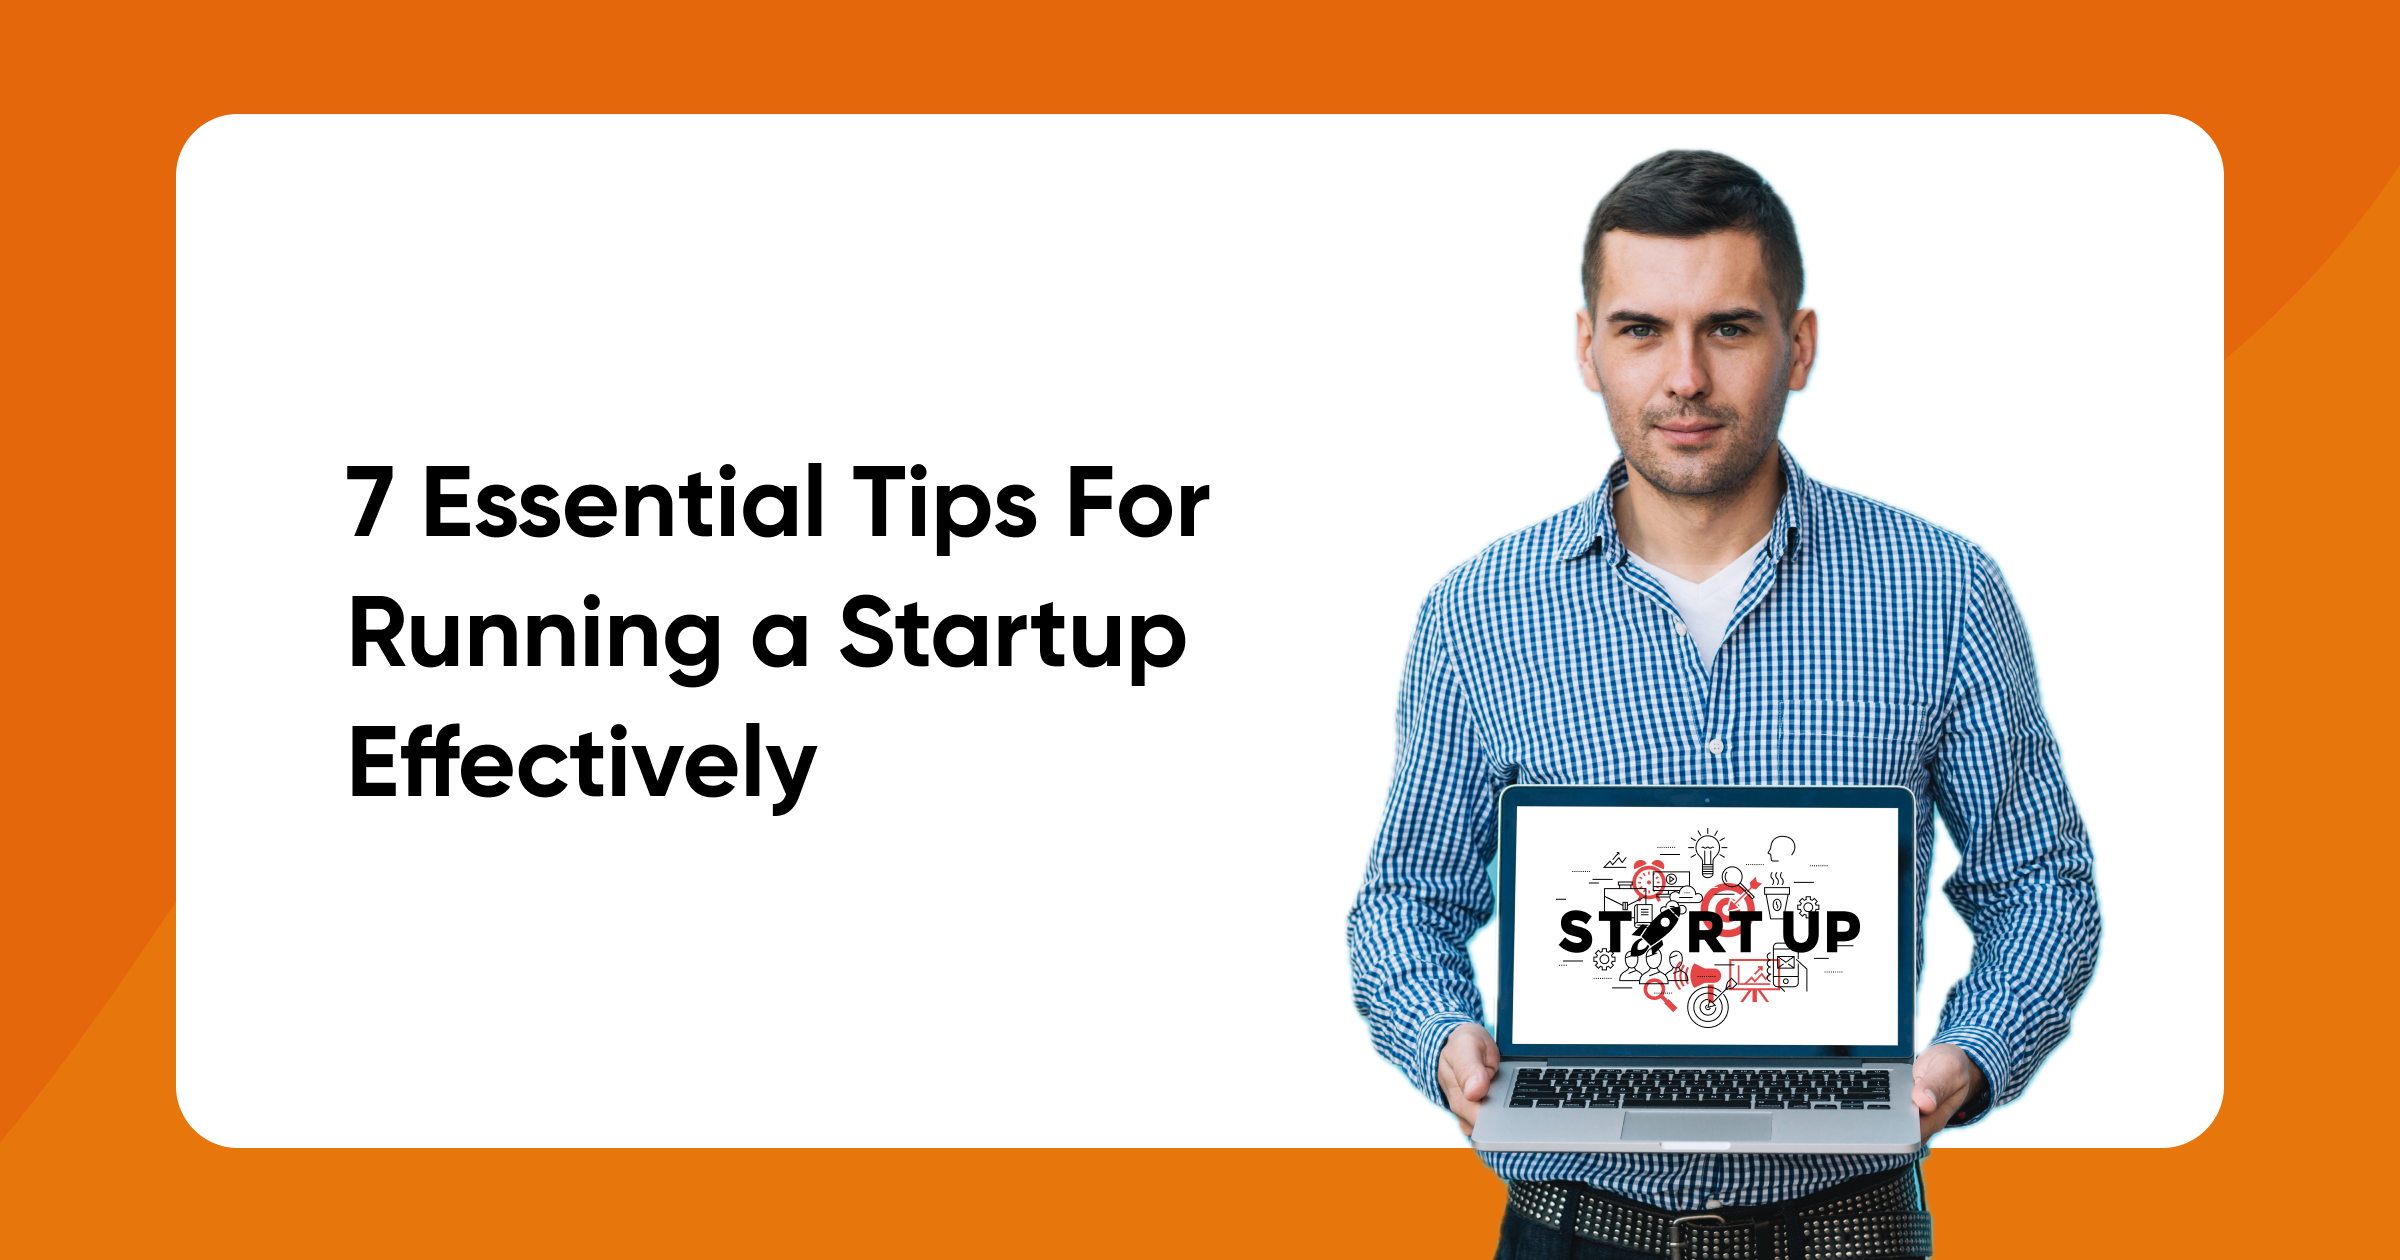 7 Essential Tips For Running a Startup Effectively